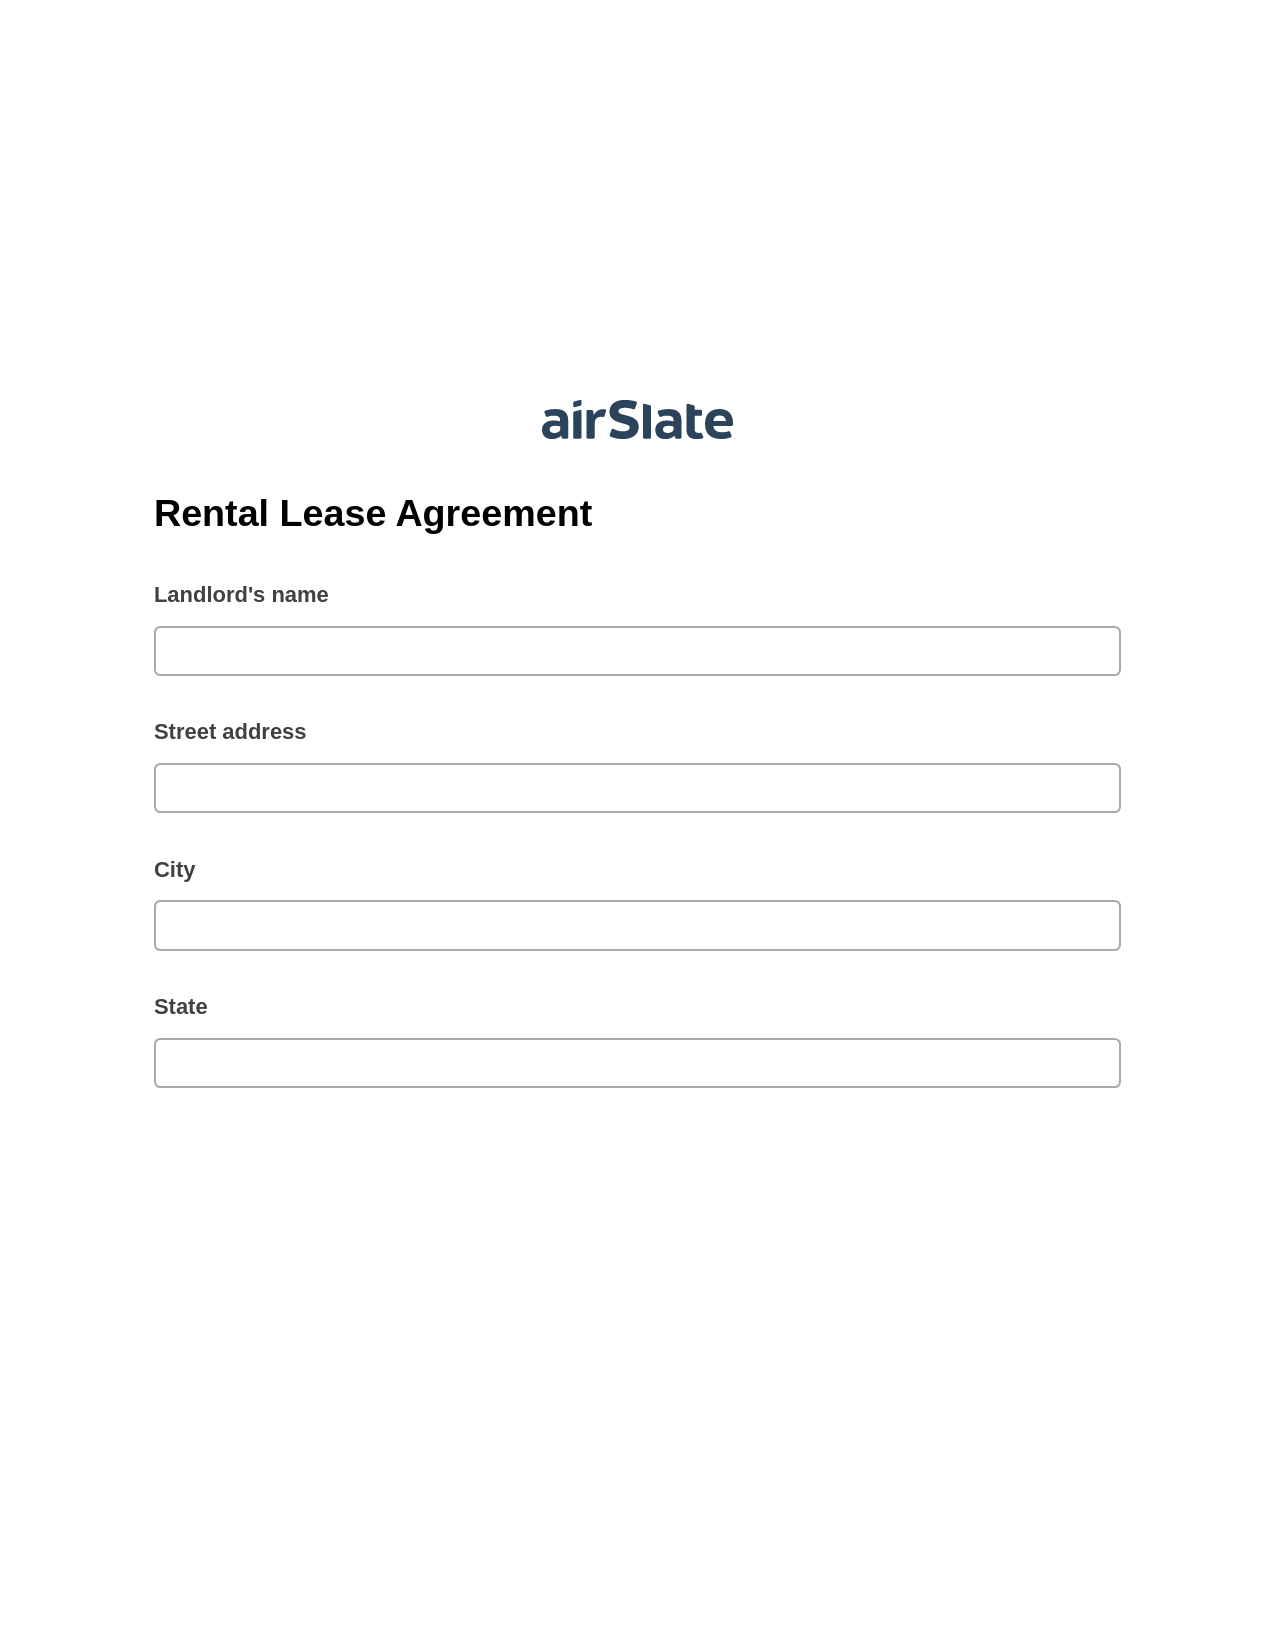 Multirole Rental Lease Agreement Pre-fill from Excel Spreadsheet Dropdown Options Bot, Mailchimp send Campaign bot, OneDrive Bot